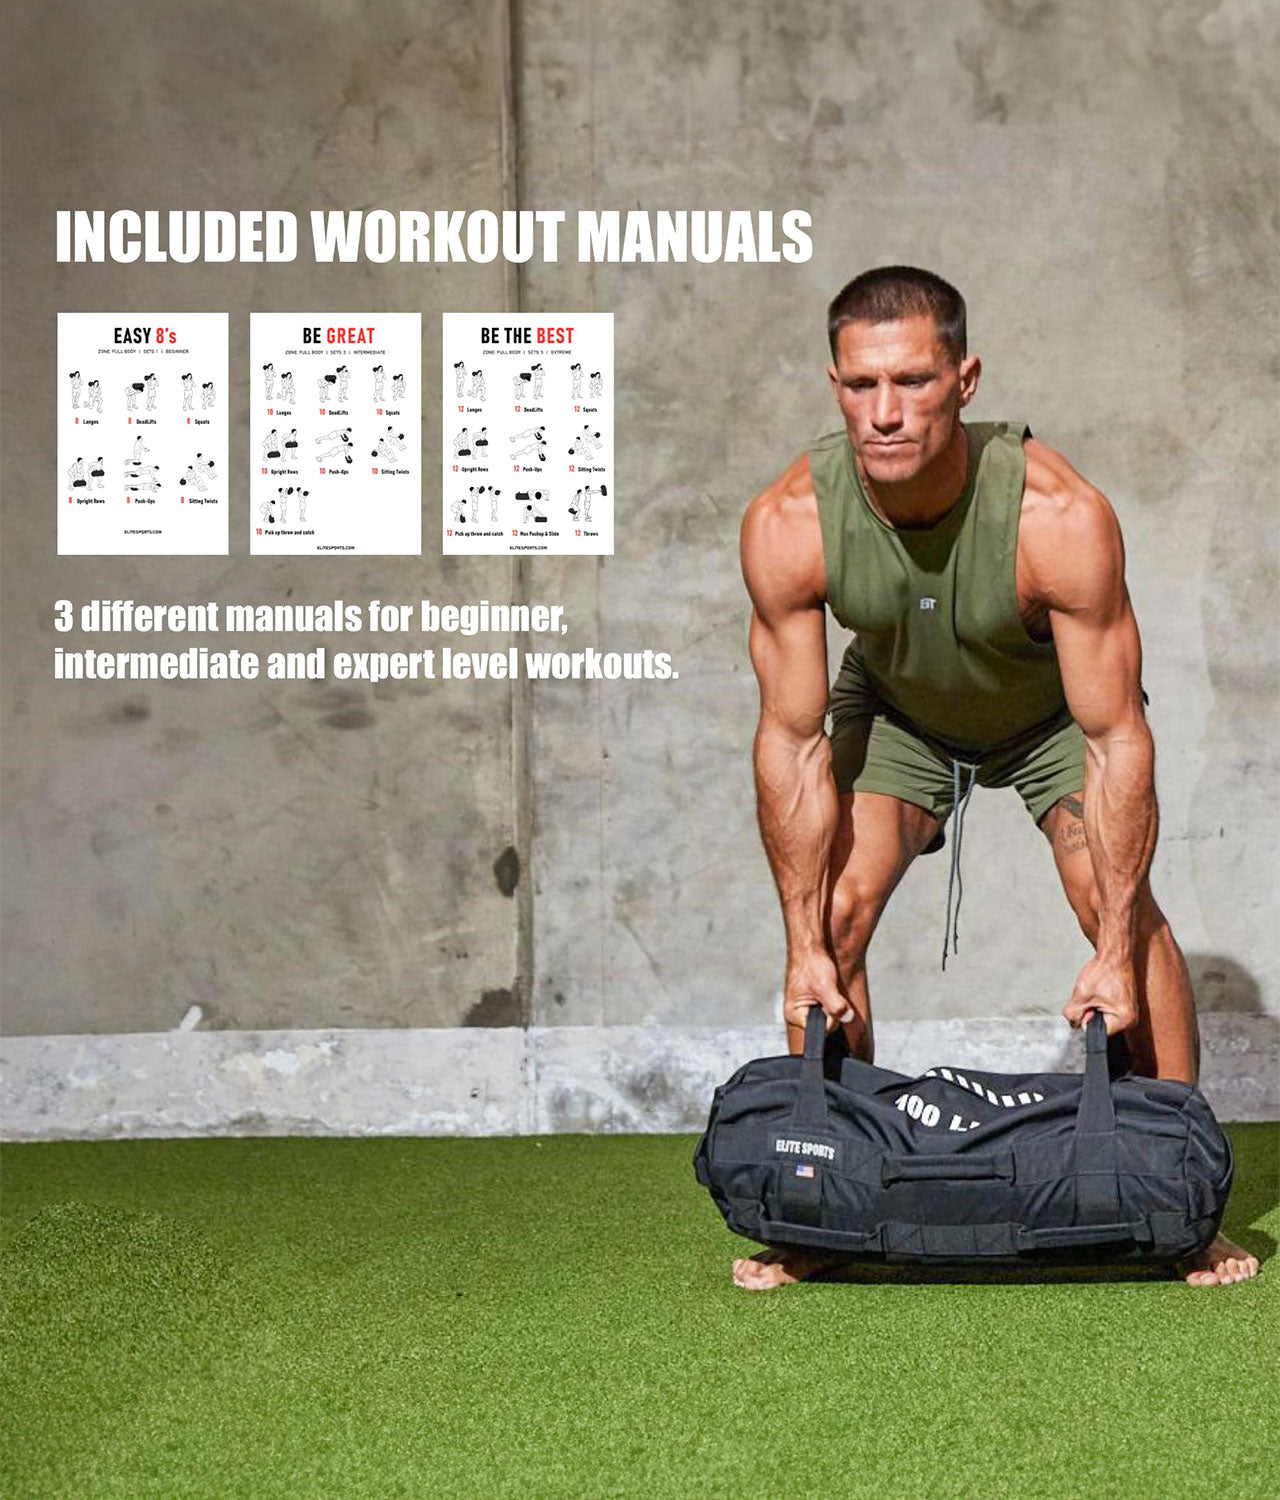 Elite Sports Set of 3 - Core Duffel Workout Sandbags Included Workout Manuals